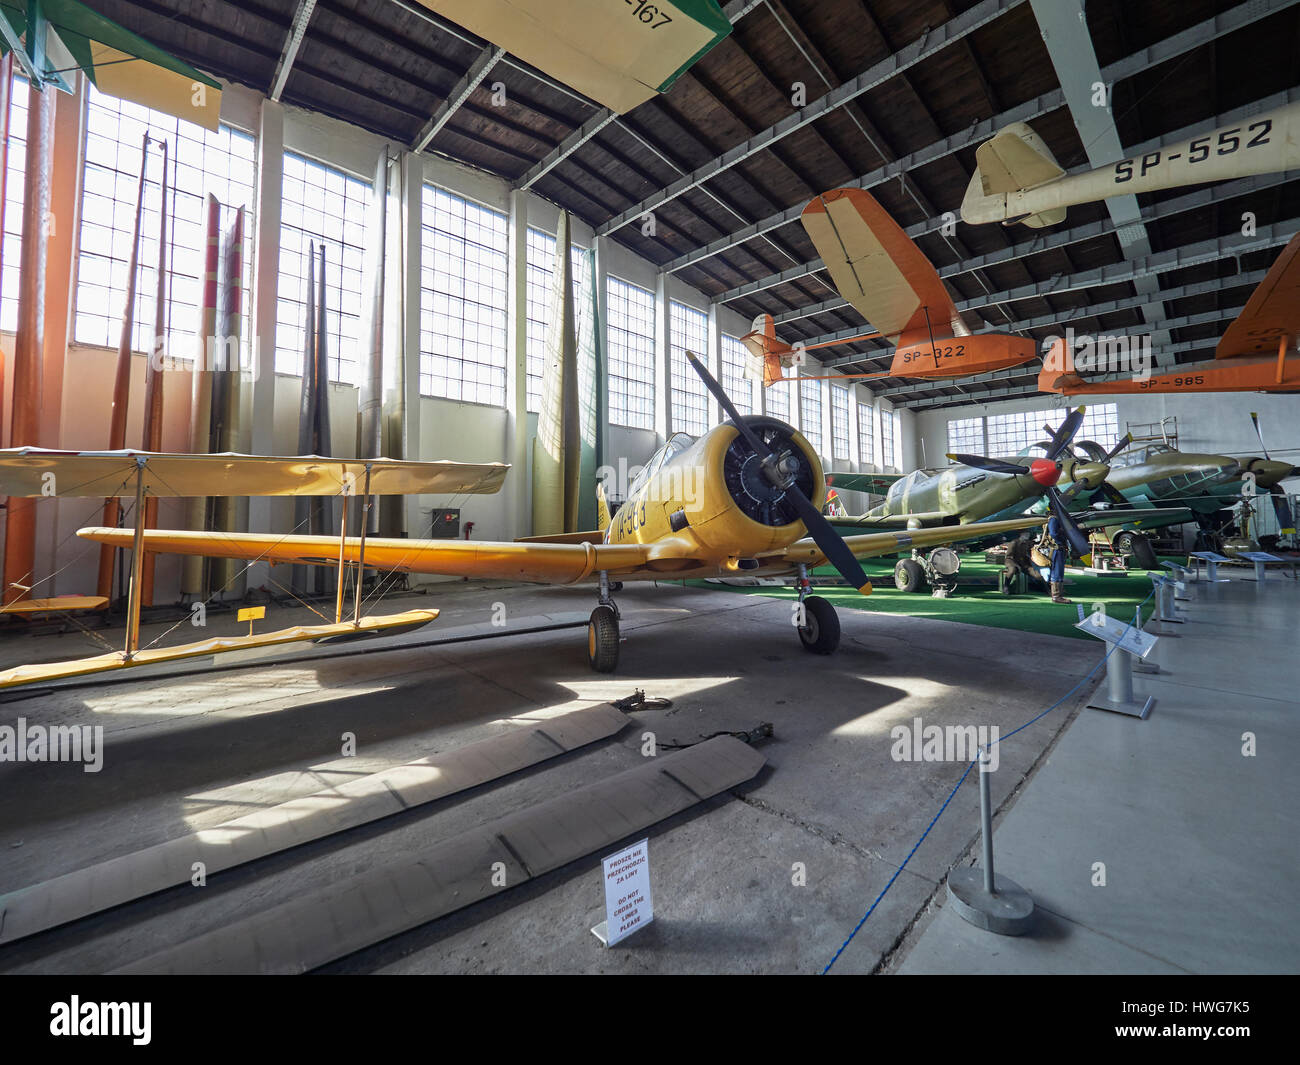 North American T-6 Texan advanced trainer WW II at the Krakow Aviation museum in Poland Stock Photo